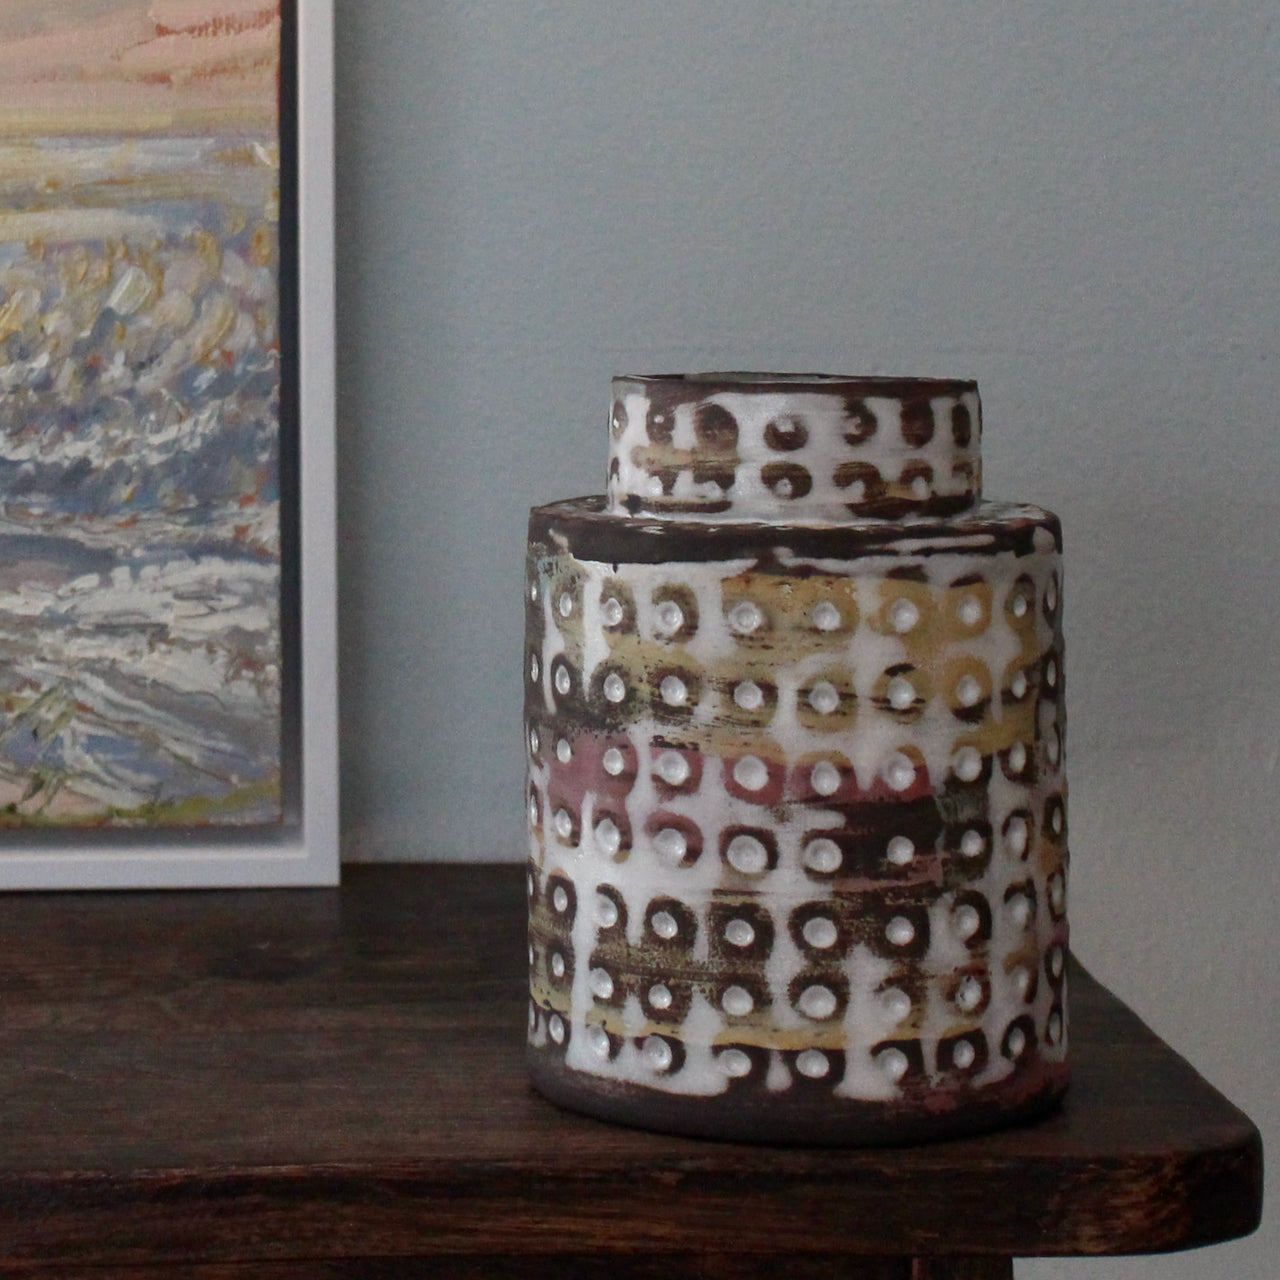  textured ceramic vessel in pinks, blues and mustard by UK potter Elly Wall